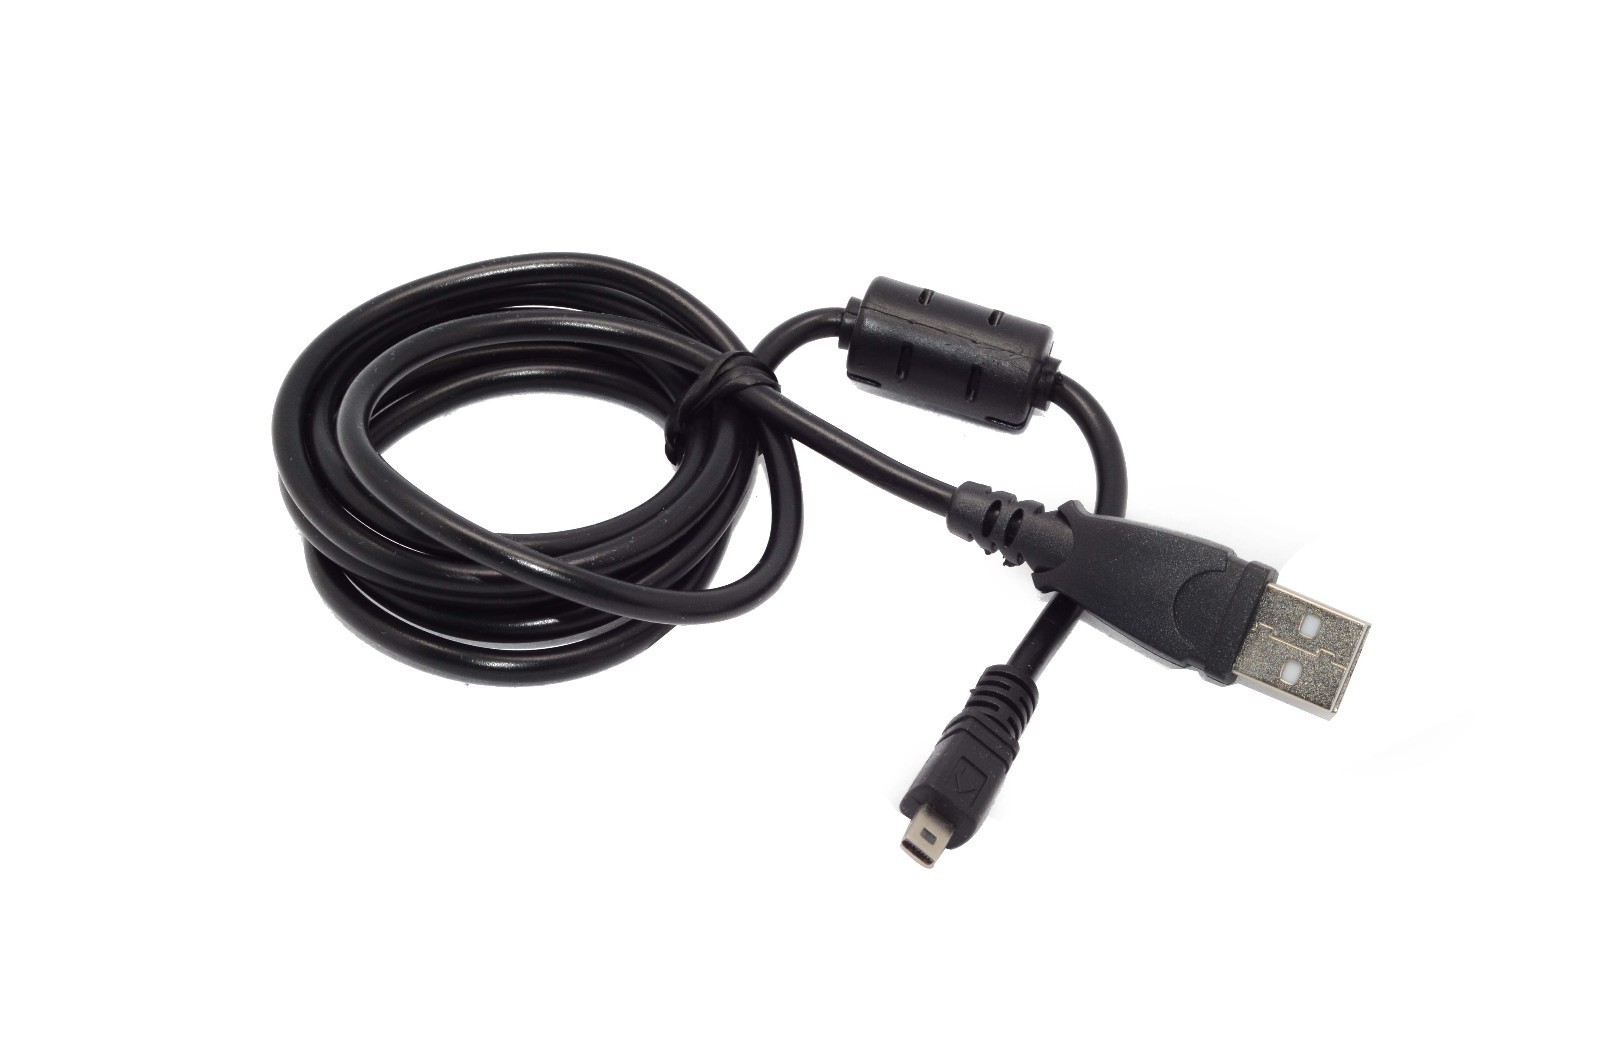 USB PC/DC Power Charger + Data Cable/Cord/Lead For BenQ DC E1460 Digital CAMERA